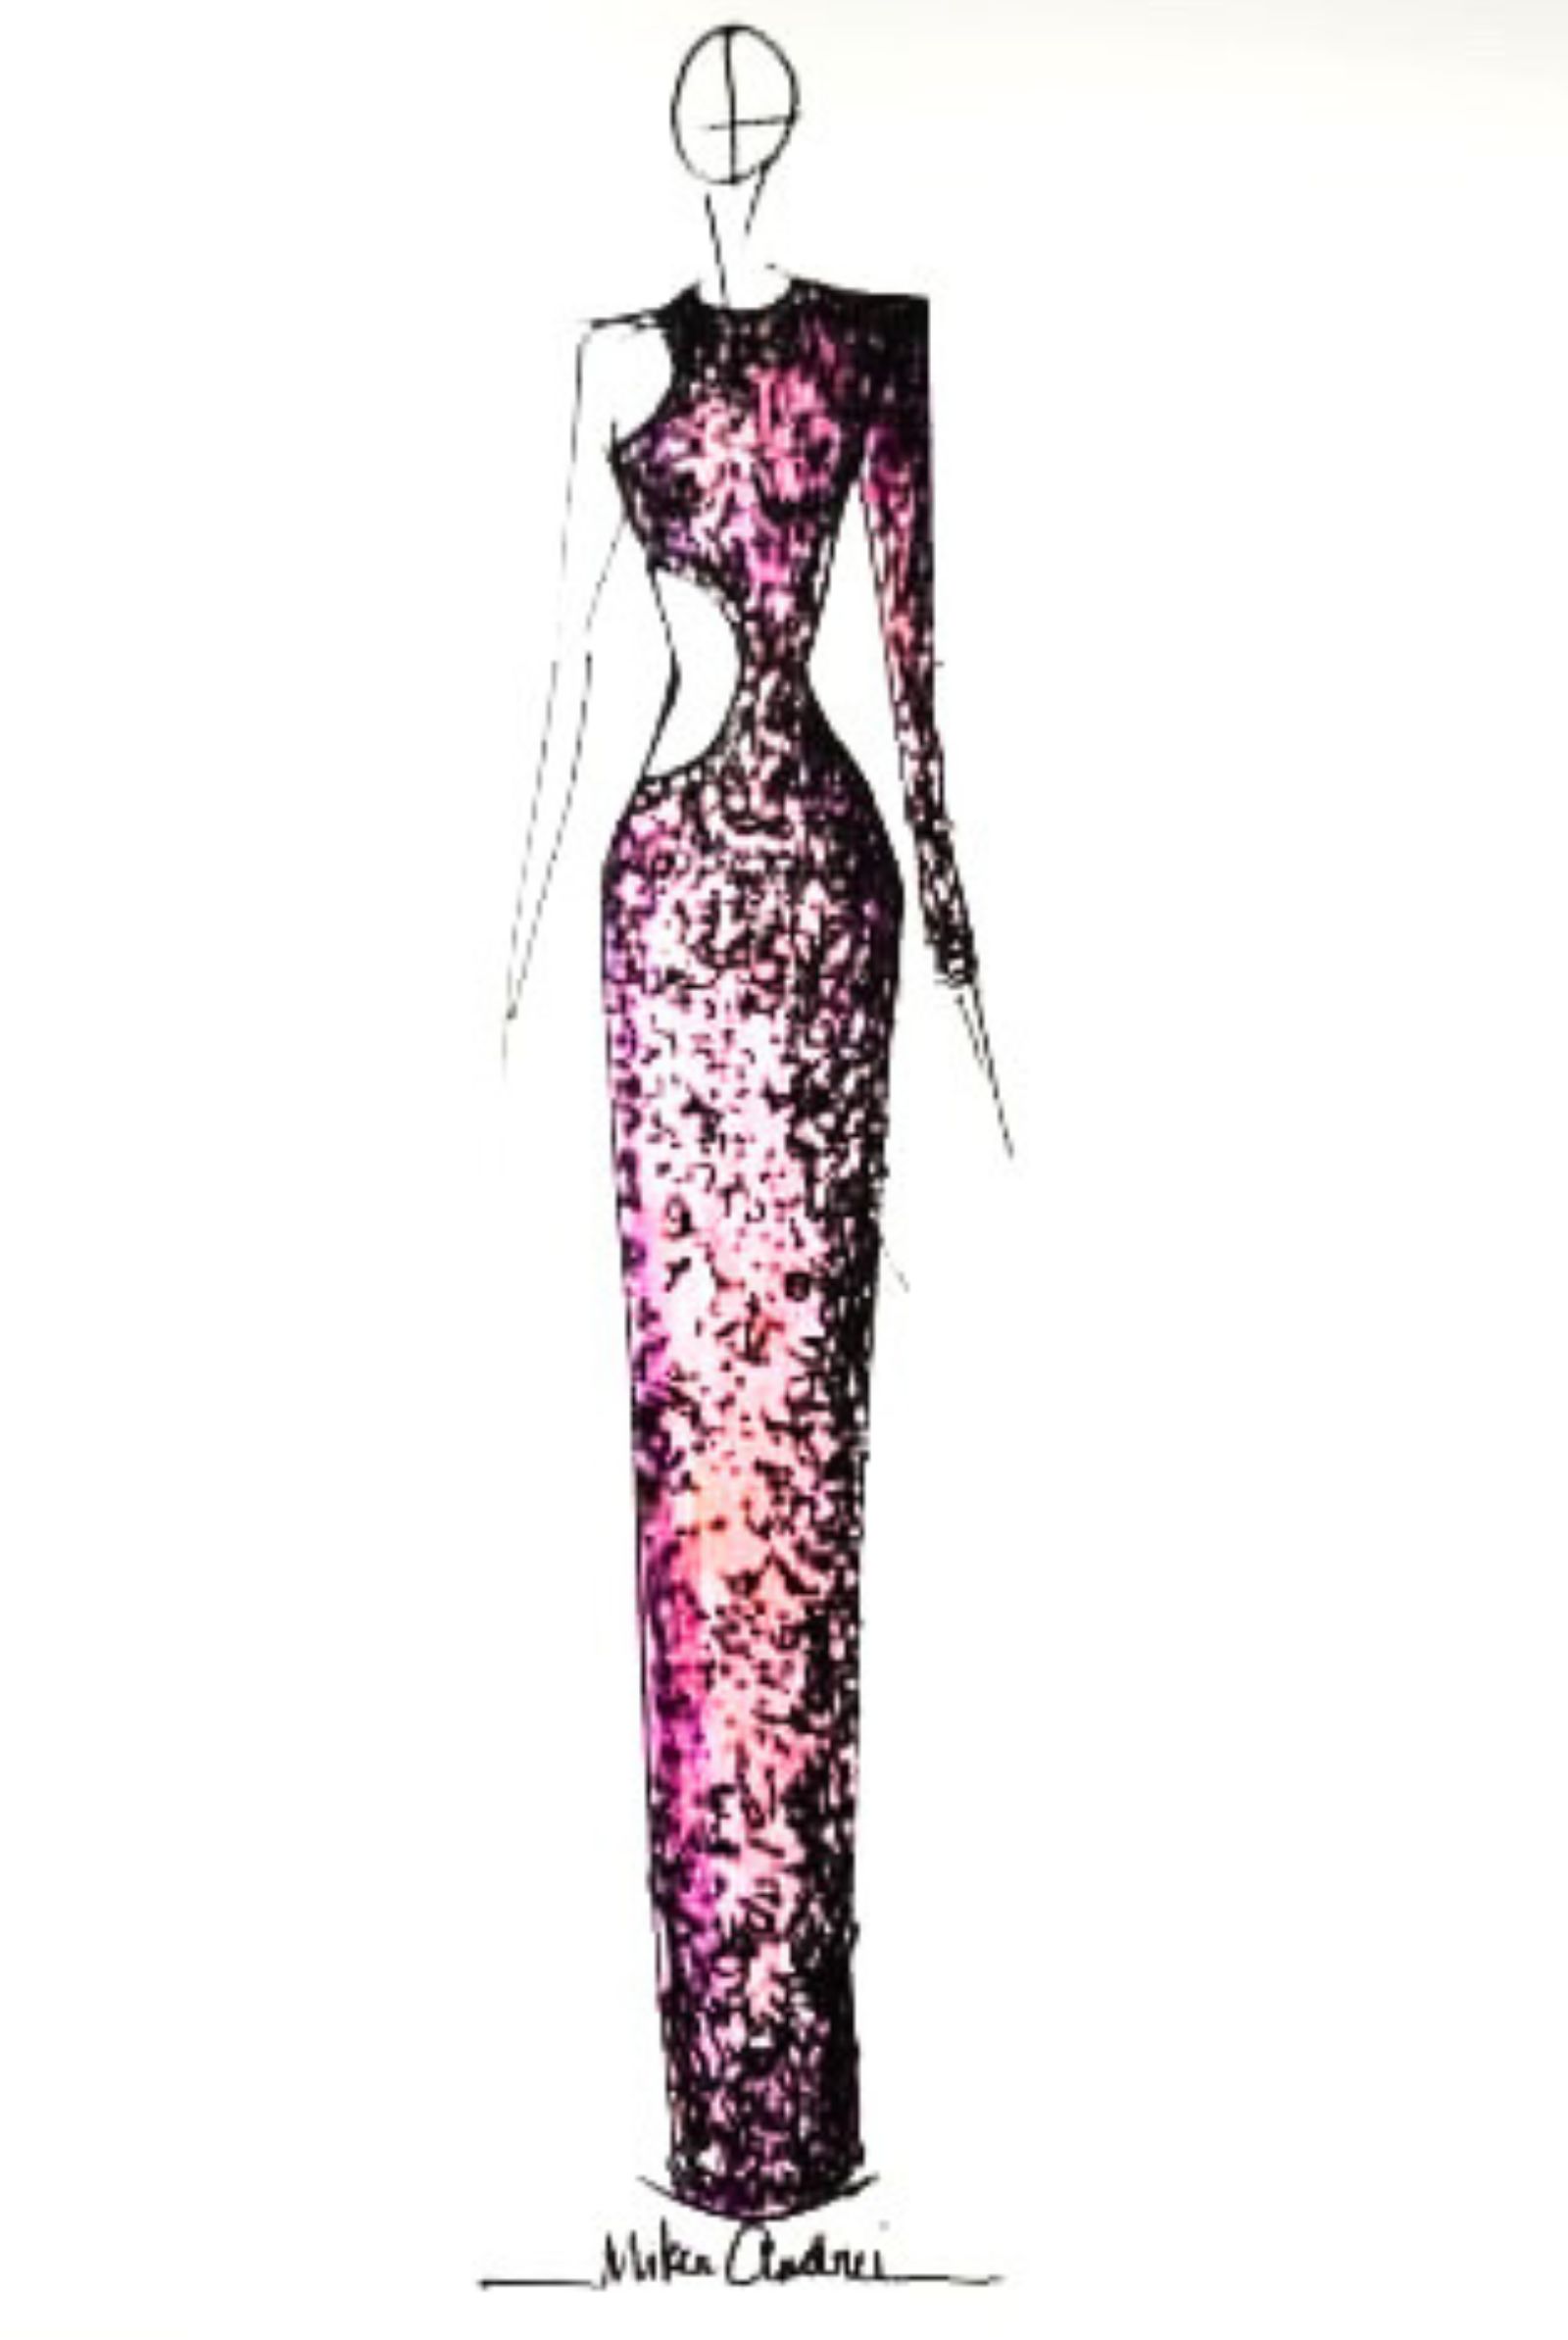 Mikee Andrei evening gown design